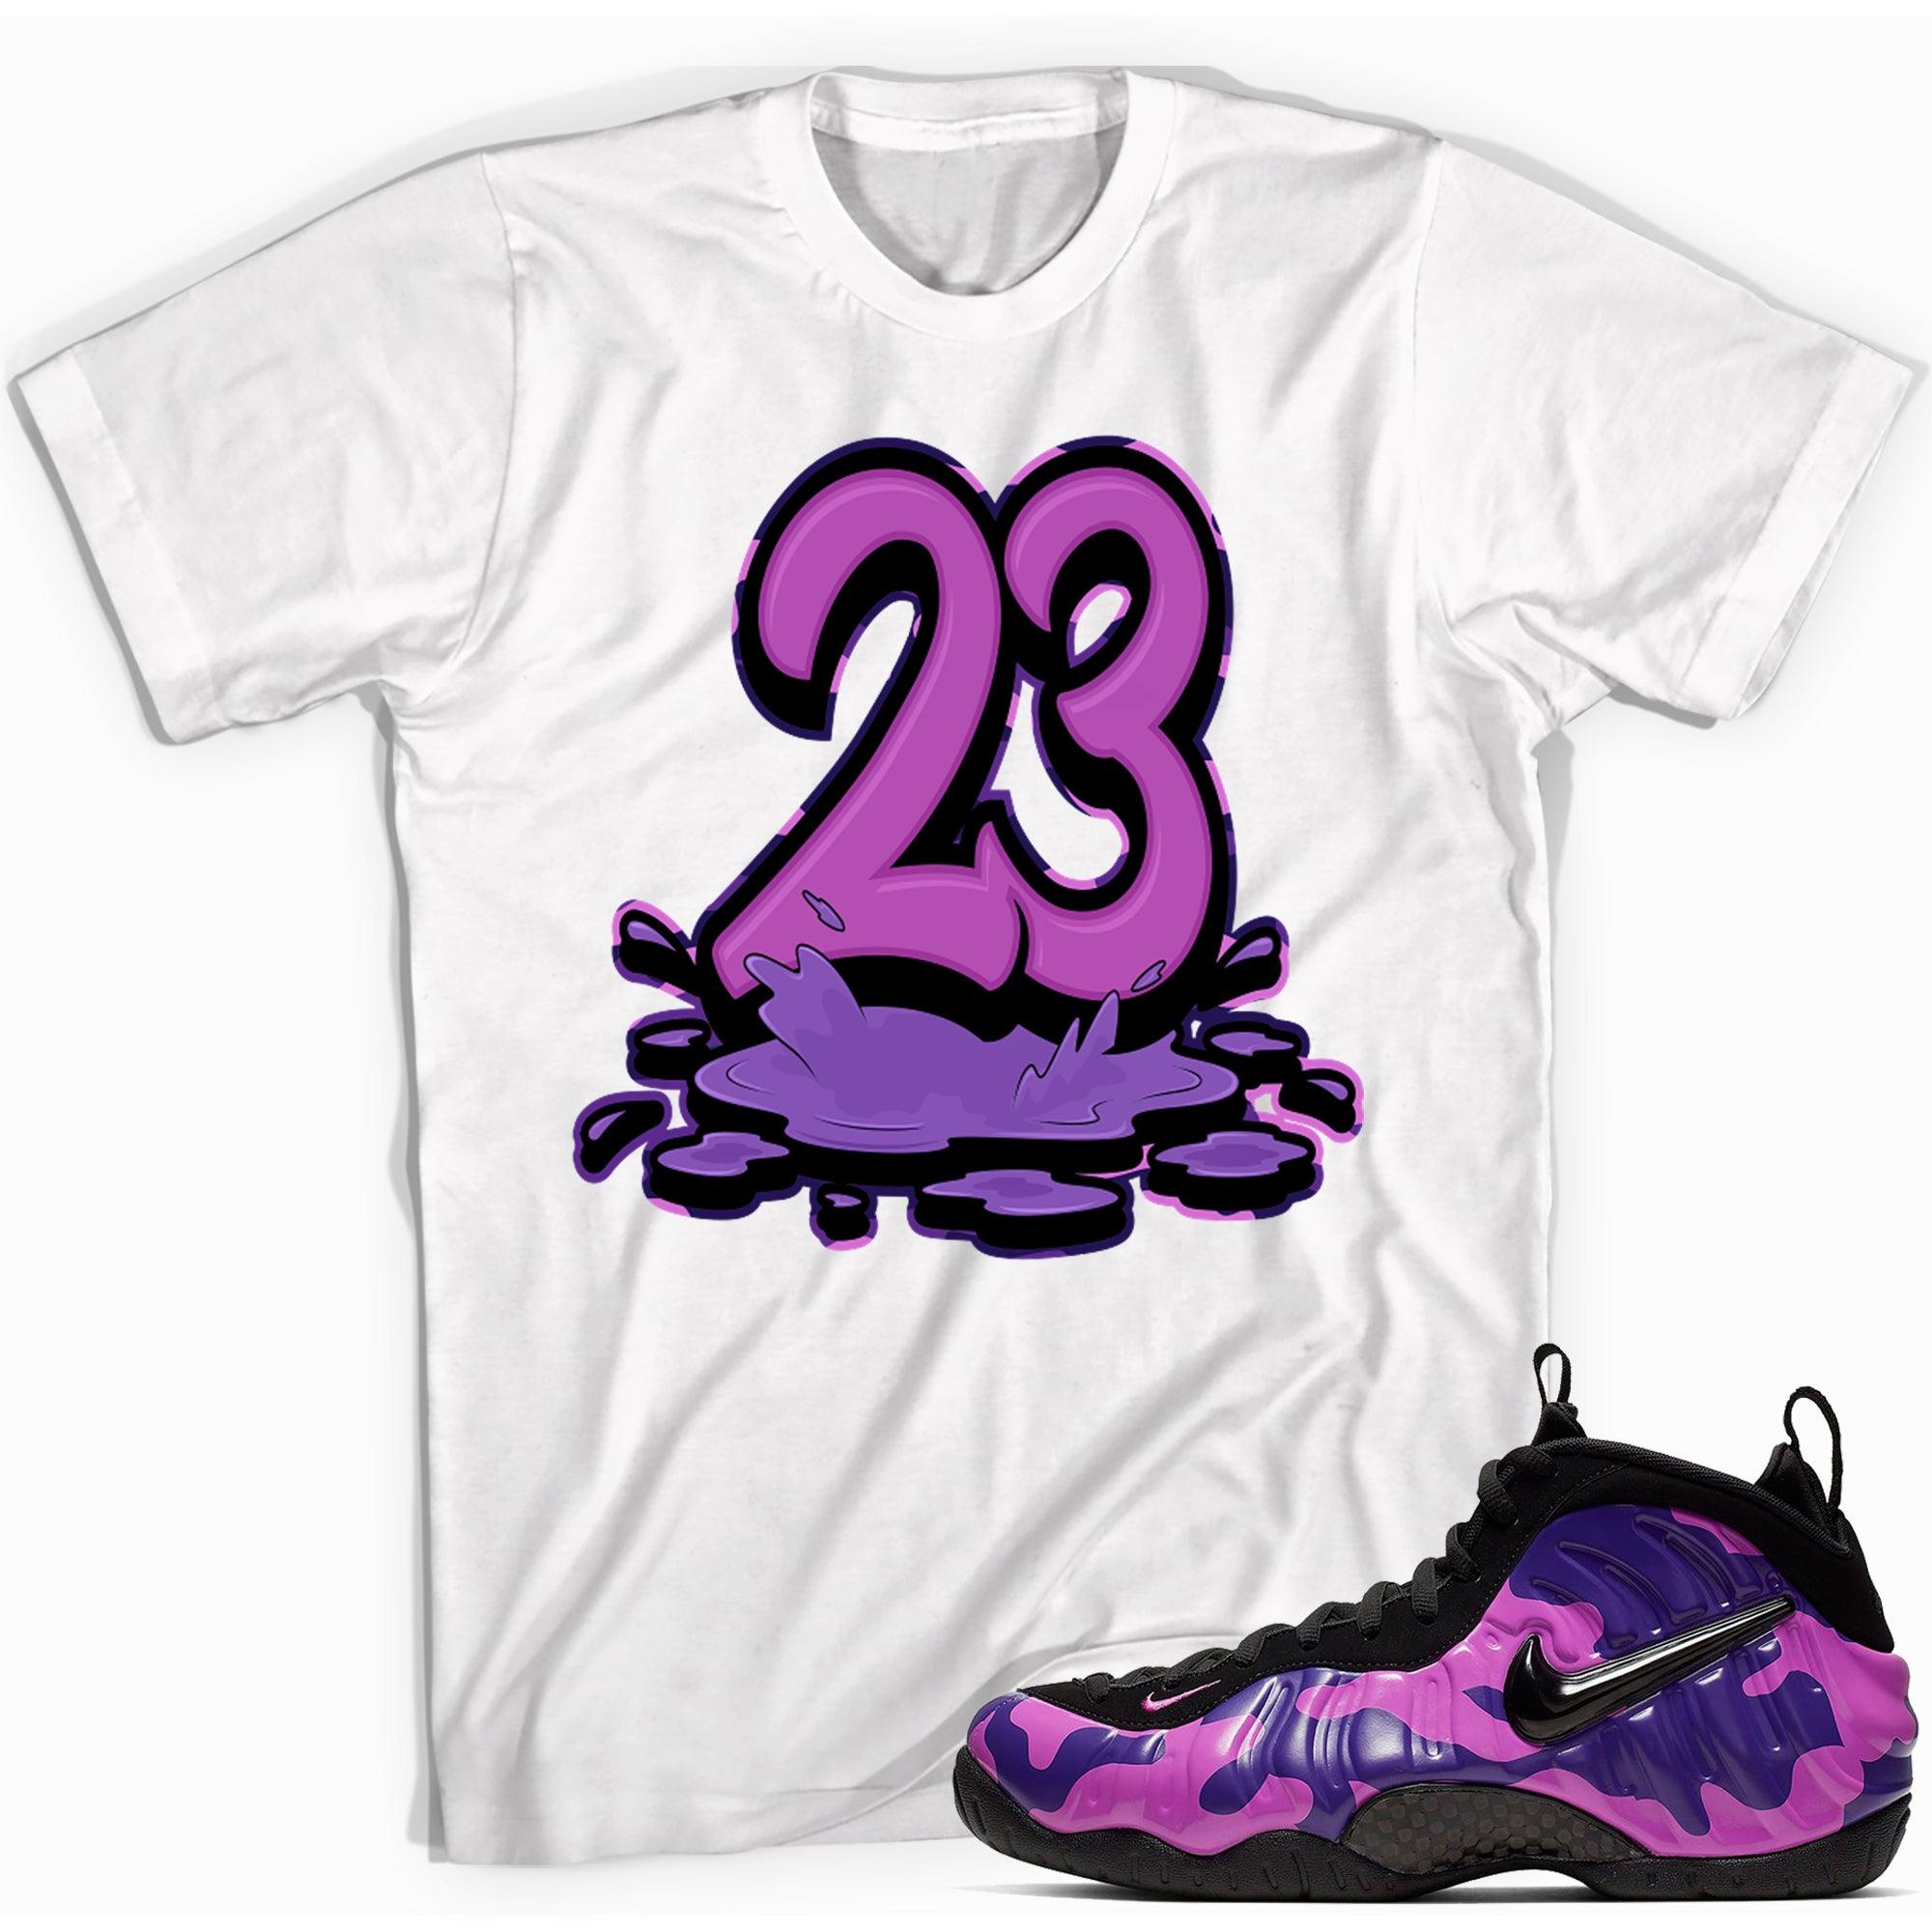 Number 23 Melting Shirt Air Foamposite One Purple Camo photo